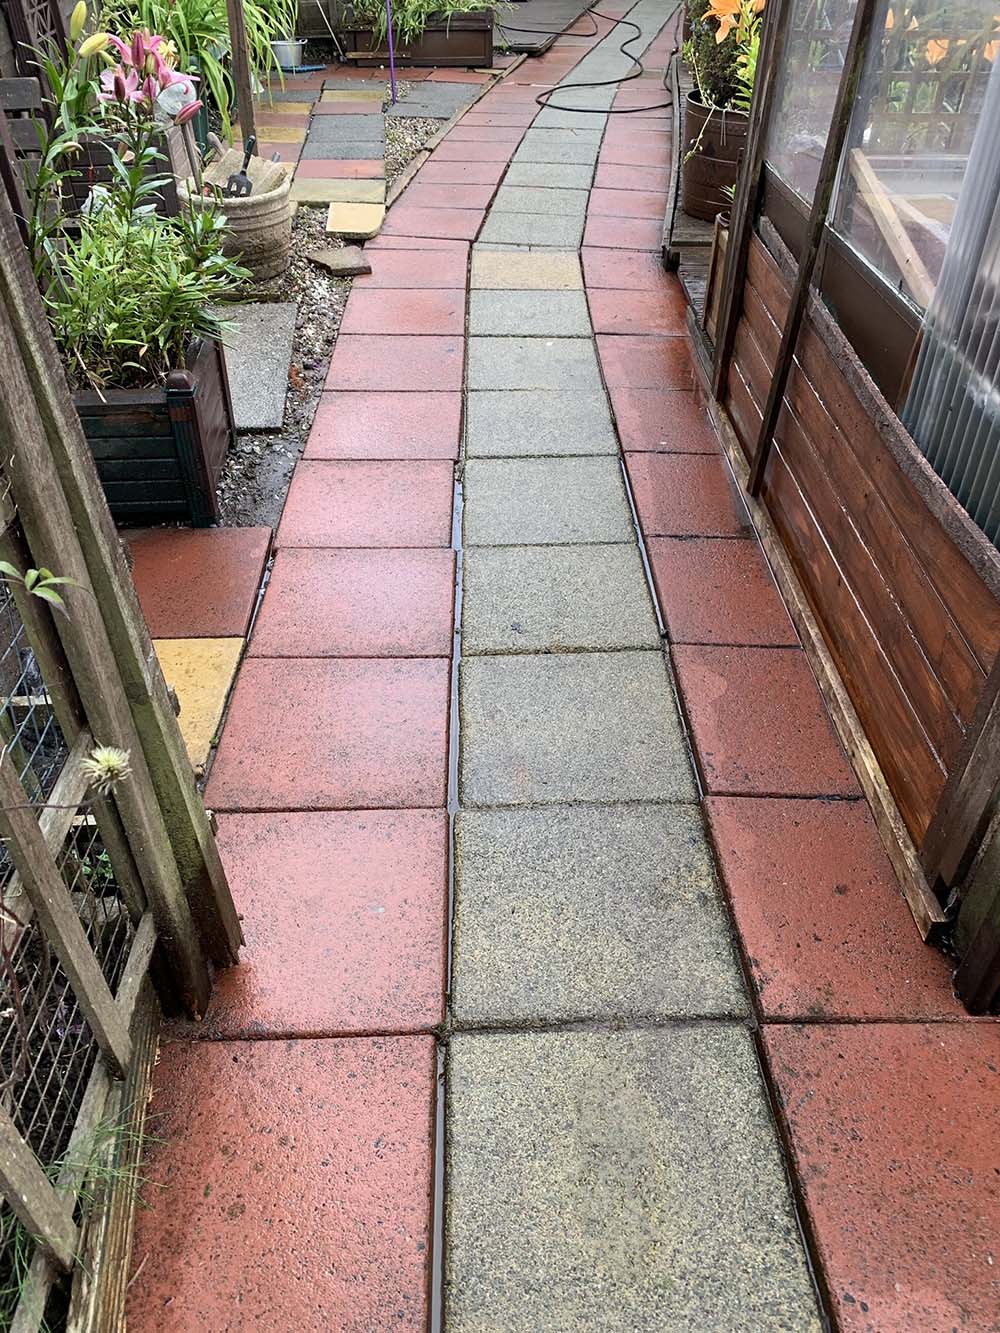 Patio Cleaning